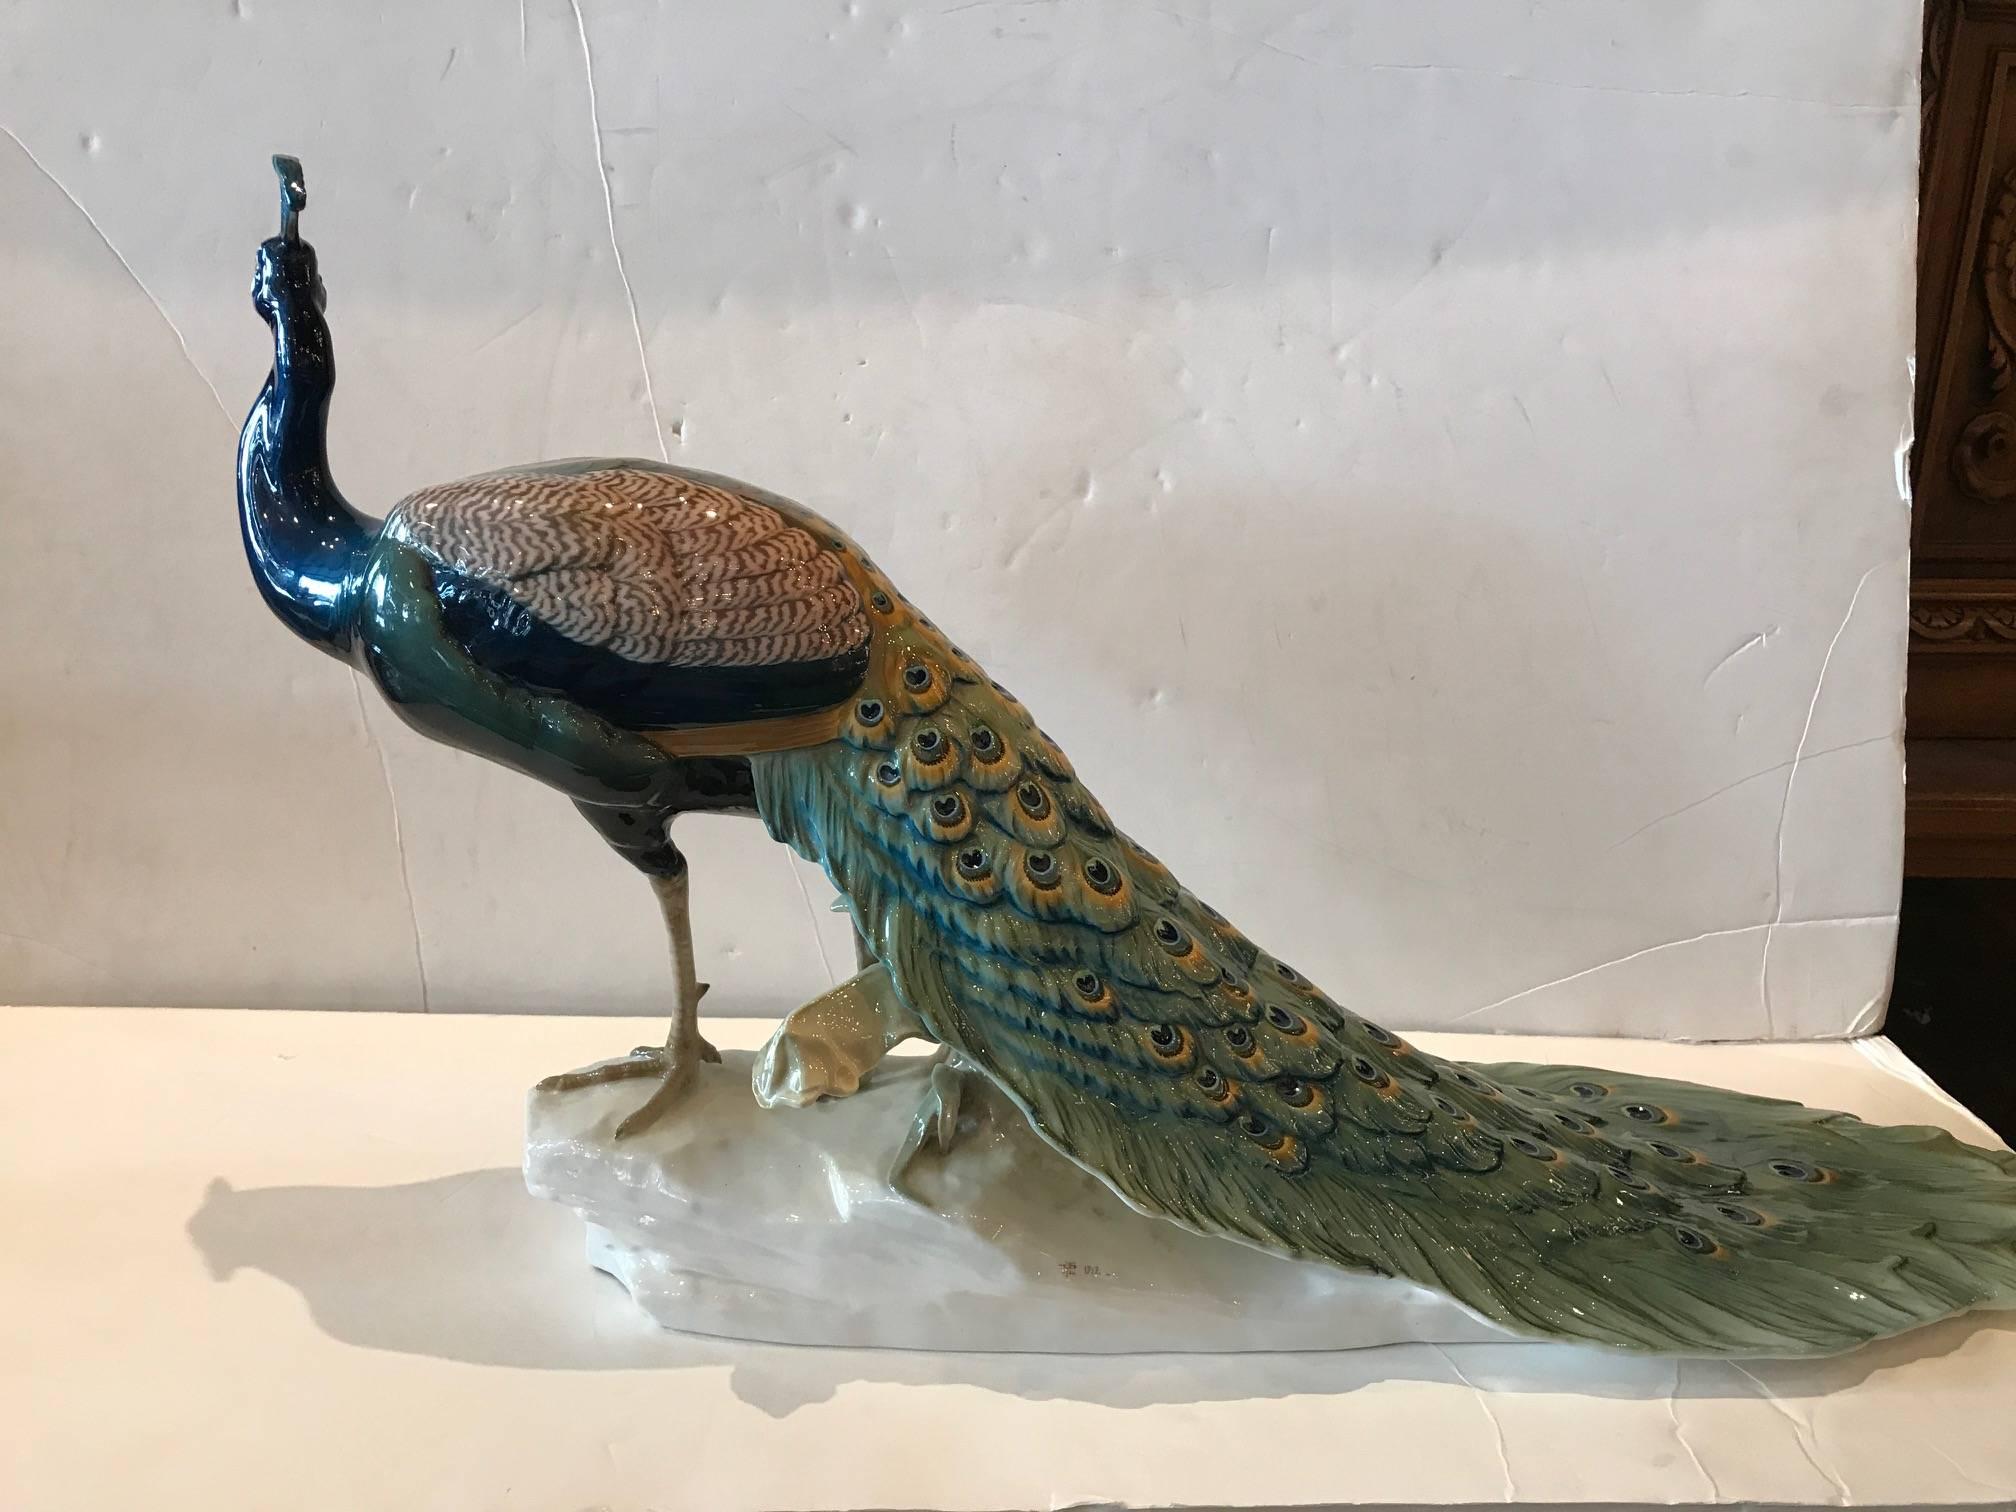 Breath taking porcelain peacock by Nymphenburg, the sculptor Theodor Ka¨rner created in 1906. This model was is signed and dated by the artist in 1912. This piece is also marked with the Nymphenburg impressed mark on the underside. The brush work on